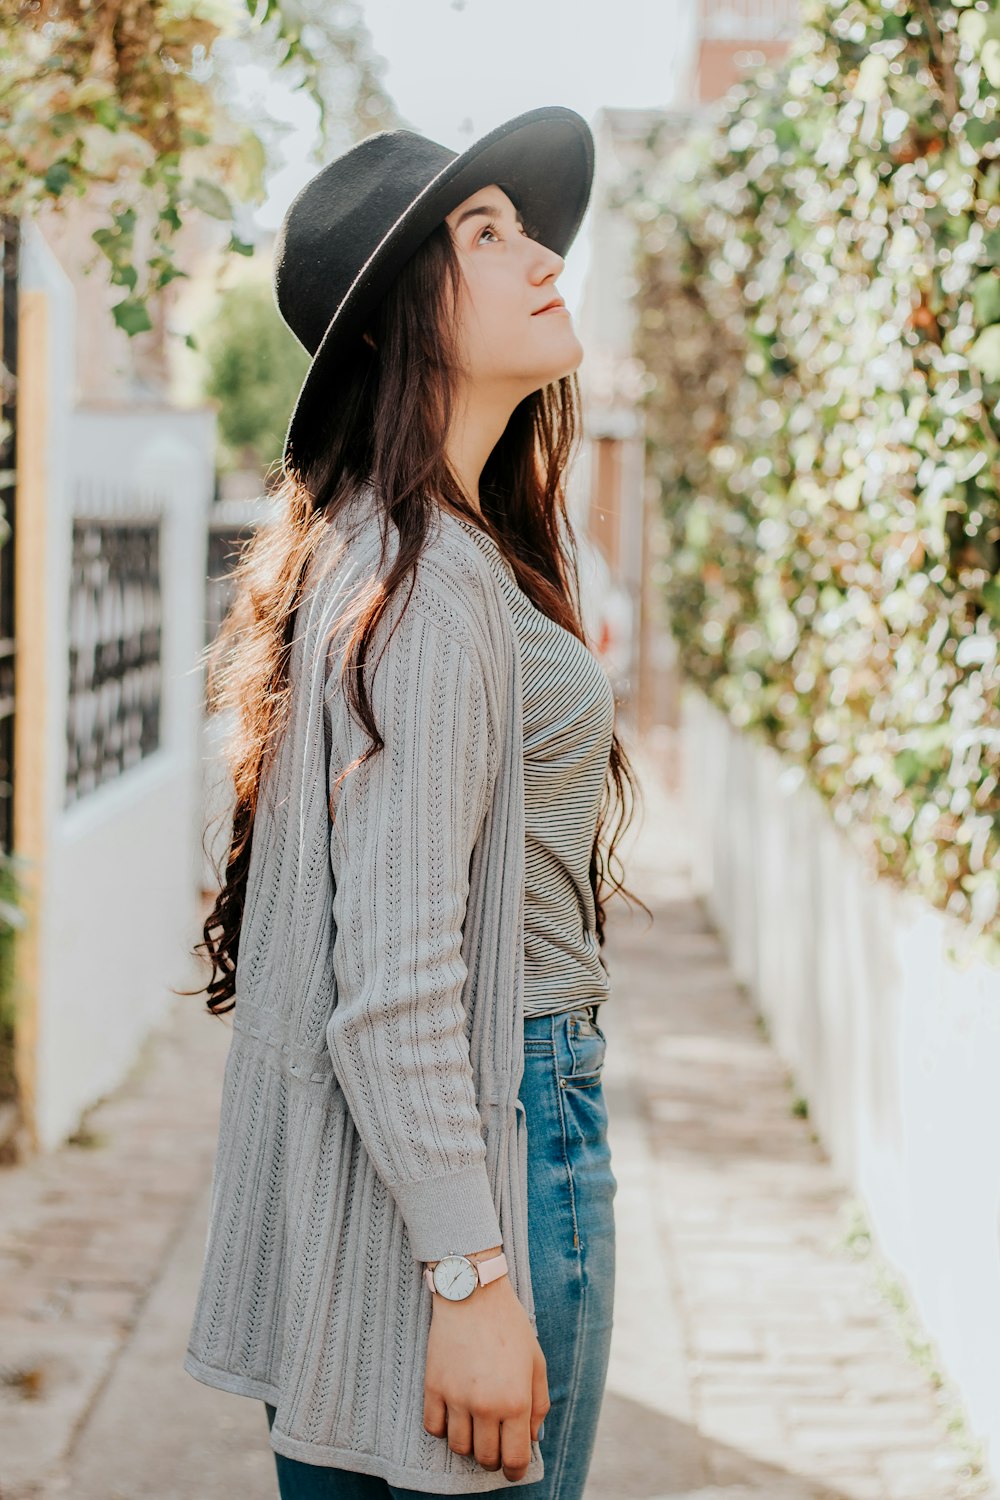 woman in white and black striped long sleeve shirt and blue denim jeans standing on sidewalk